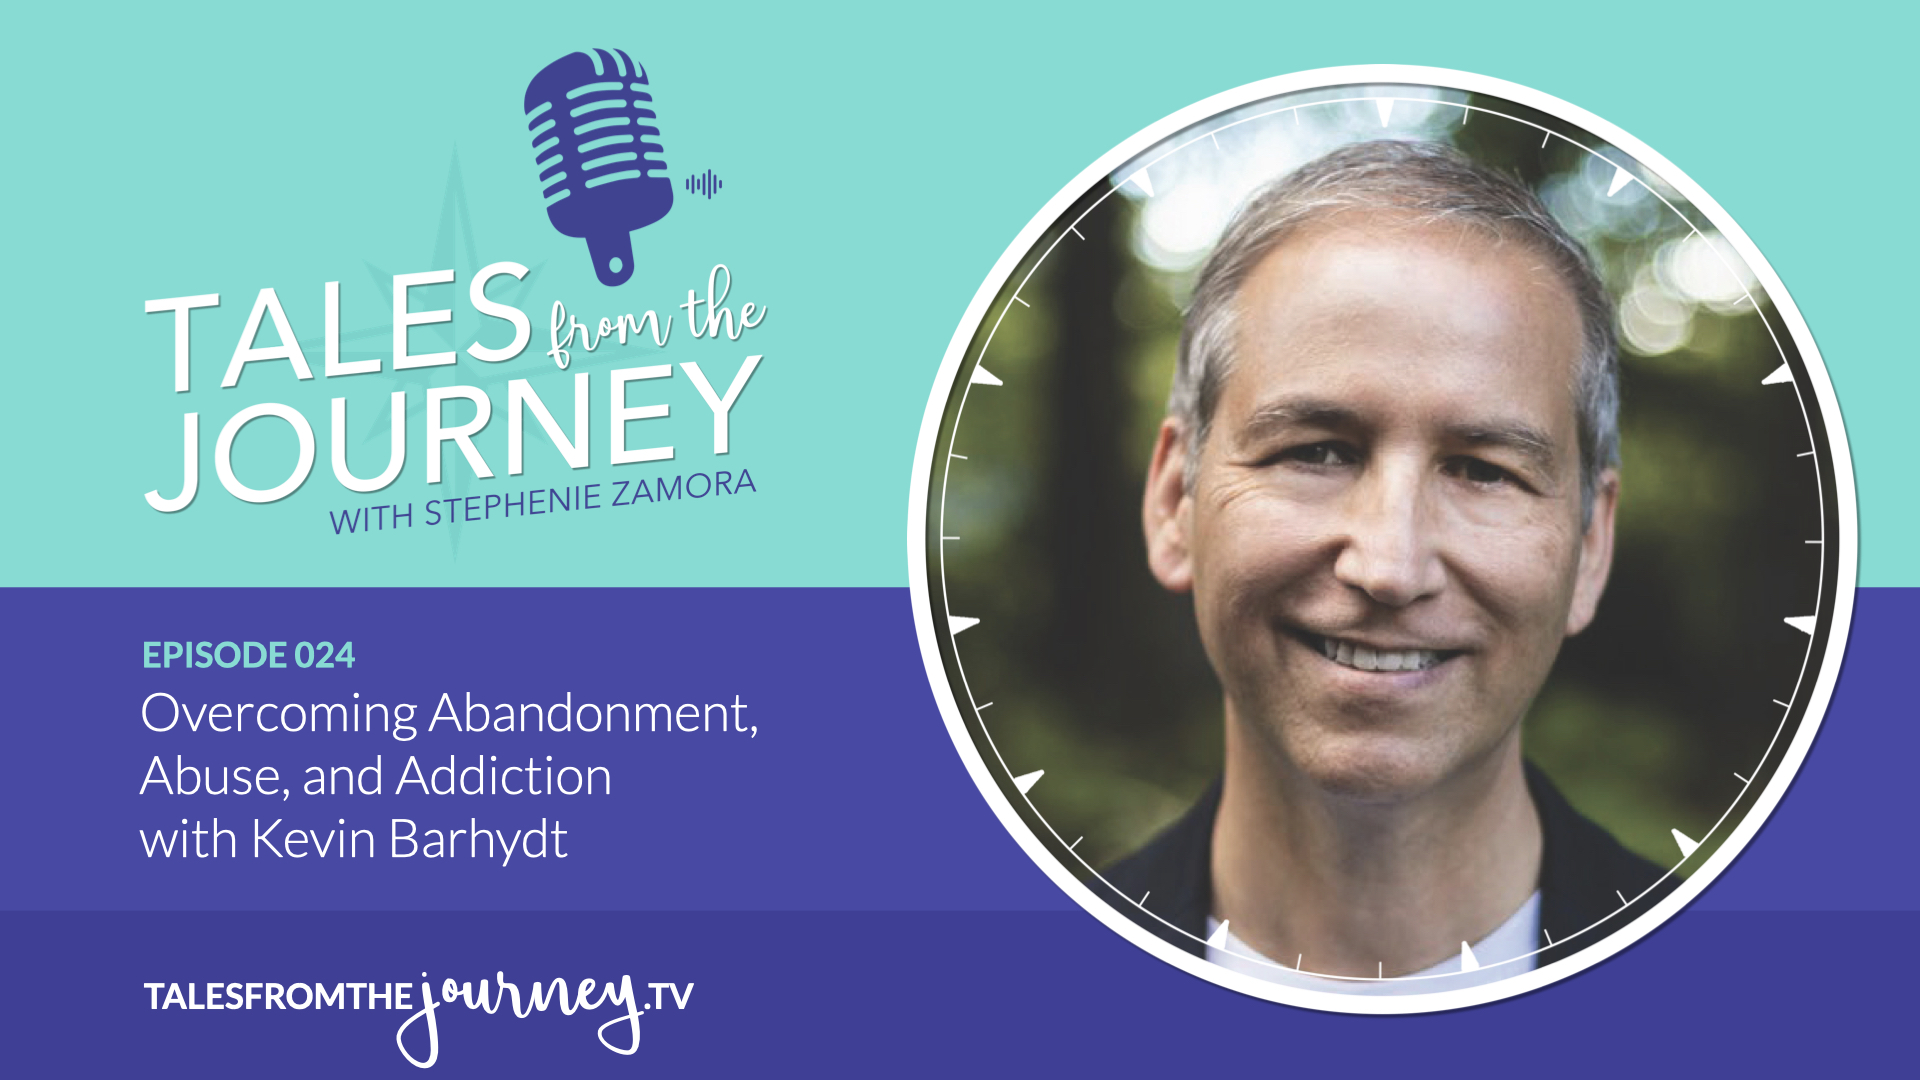 Overcoming Abandonment, Abuse, and Addiction with Kevin Barhydt